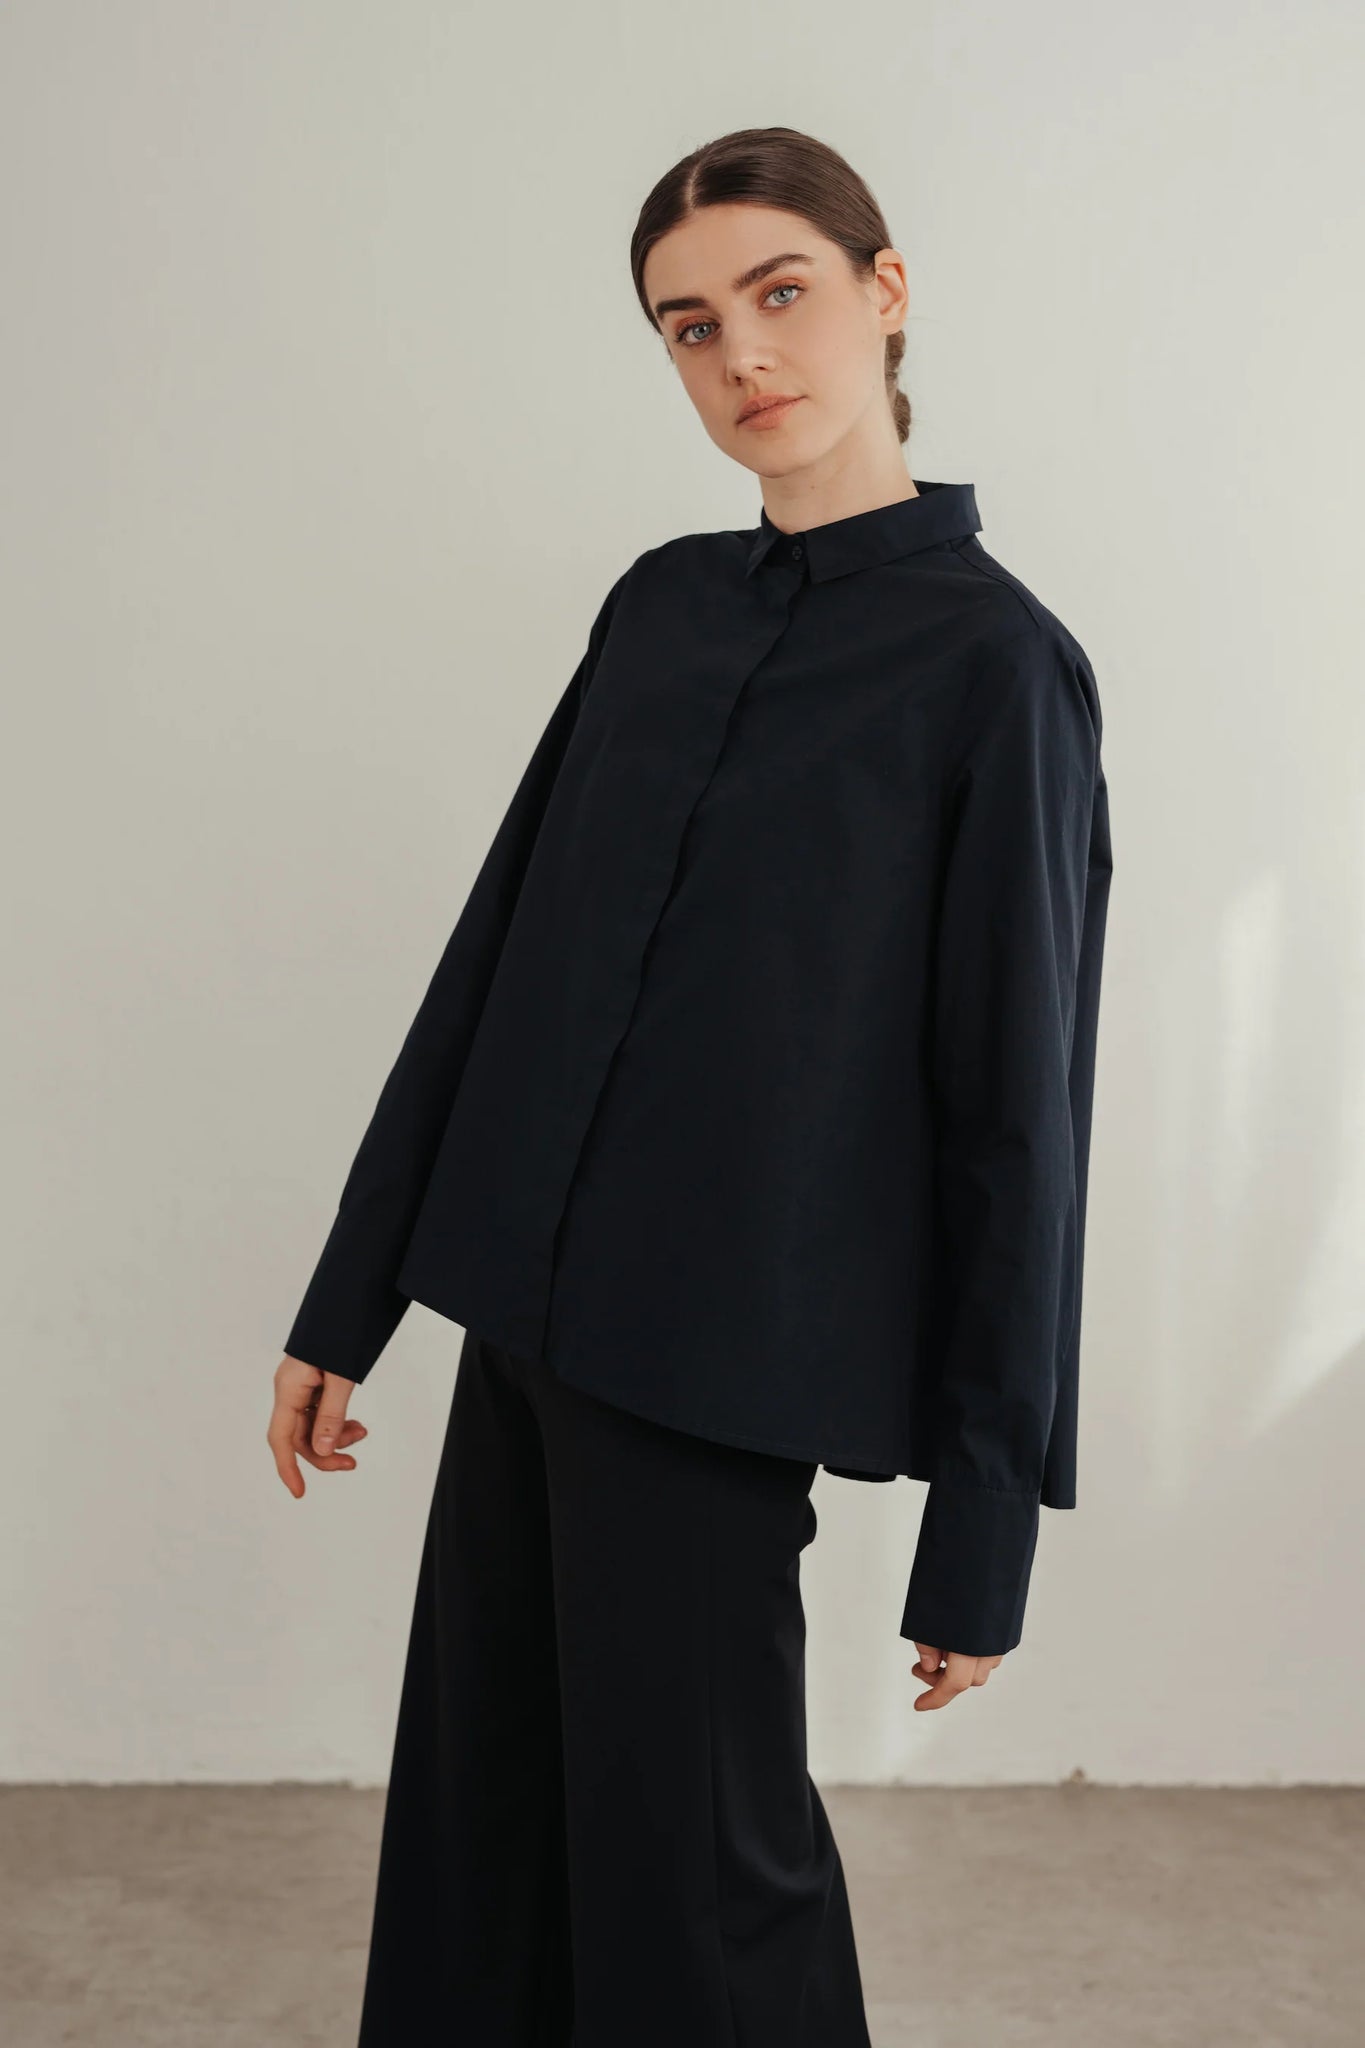 Fitted shirt with wavy back in night sky by sonho stories